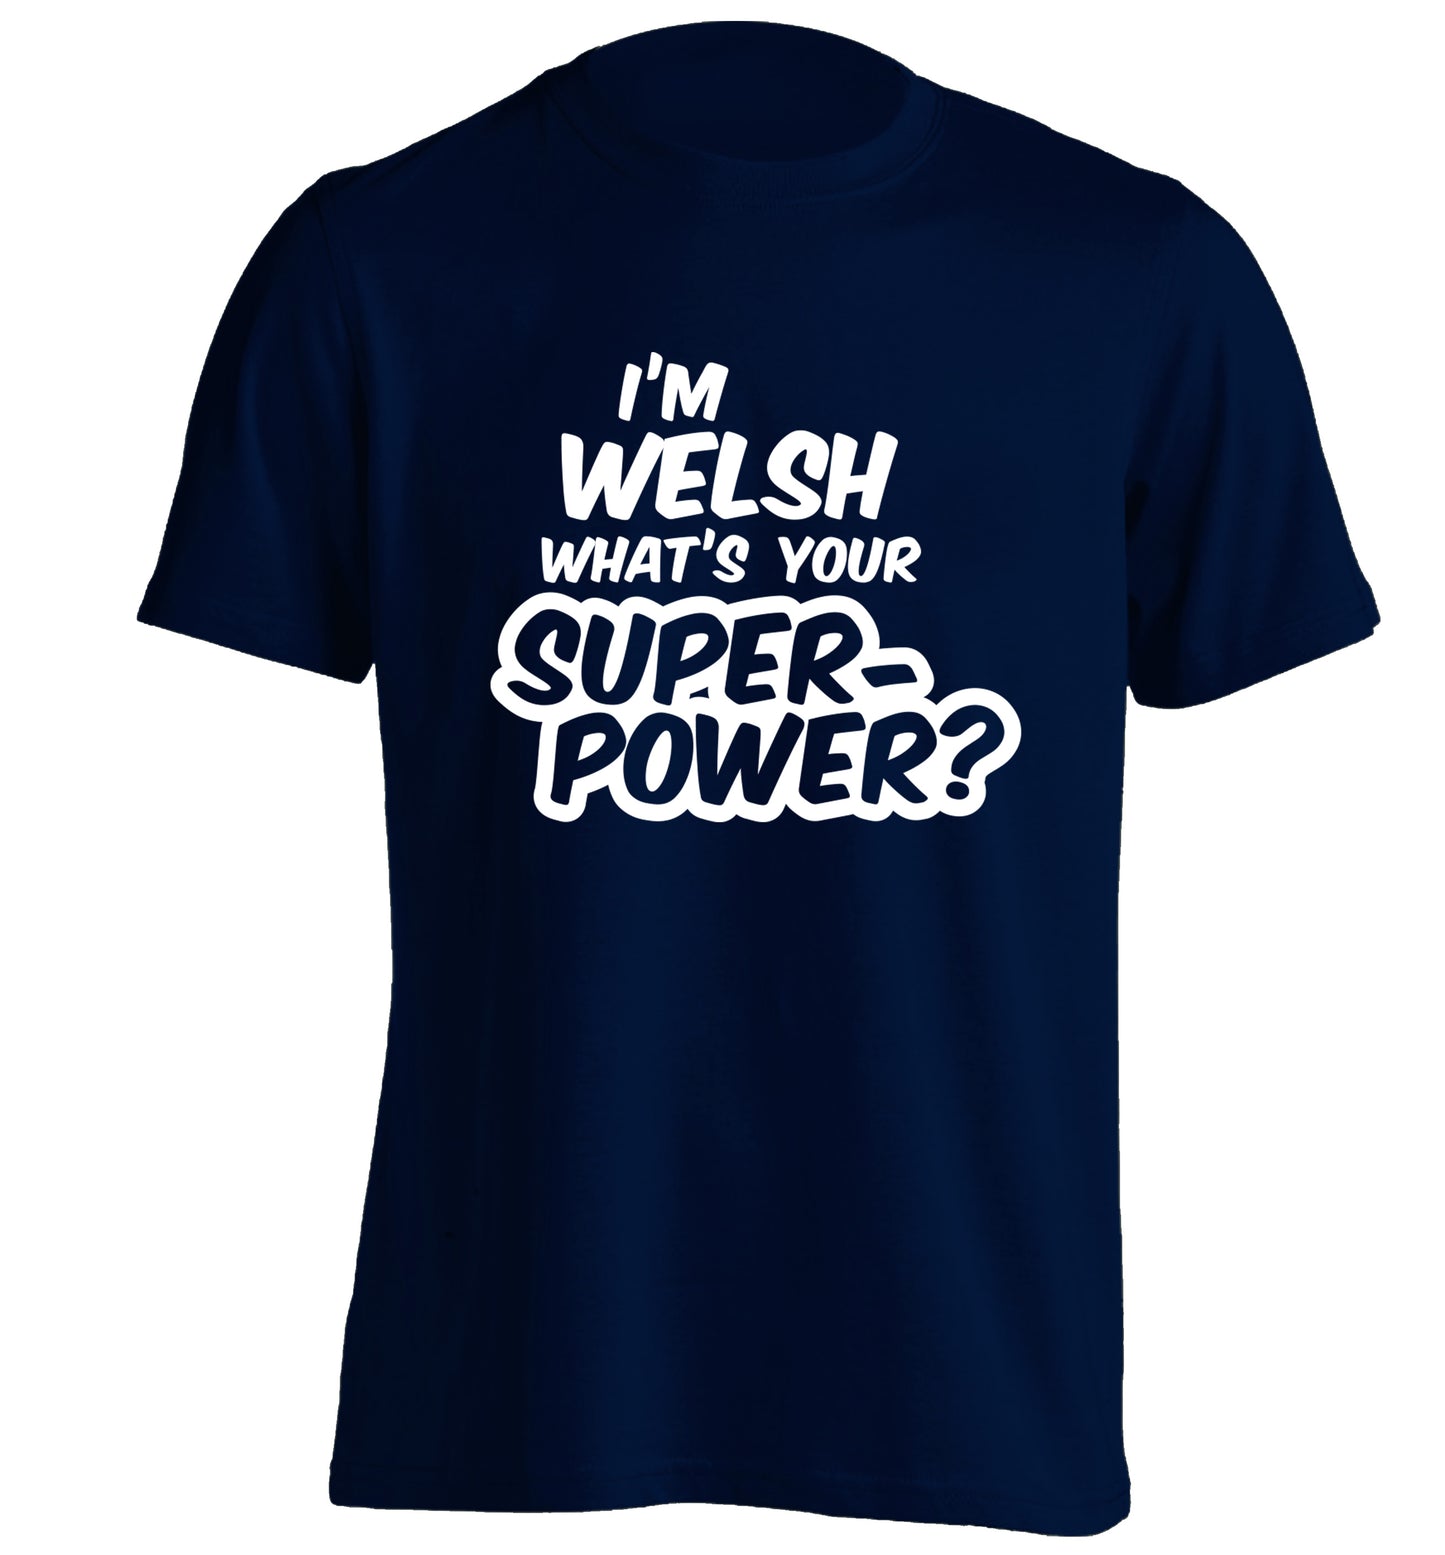 I'm Welsh what's your superpower? adults unisex navy Tshirt 2XL